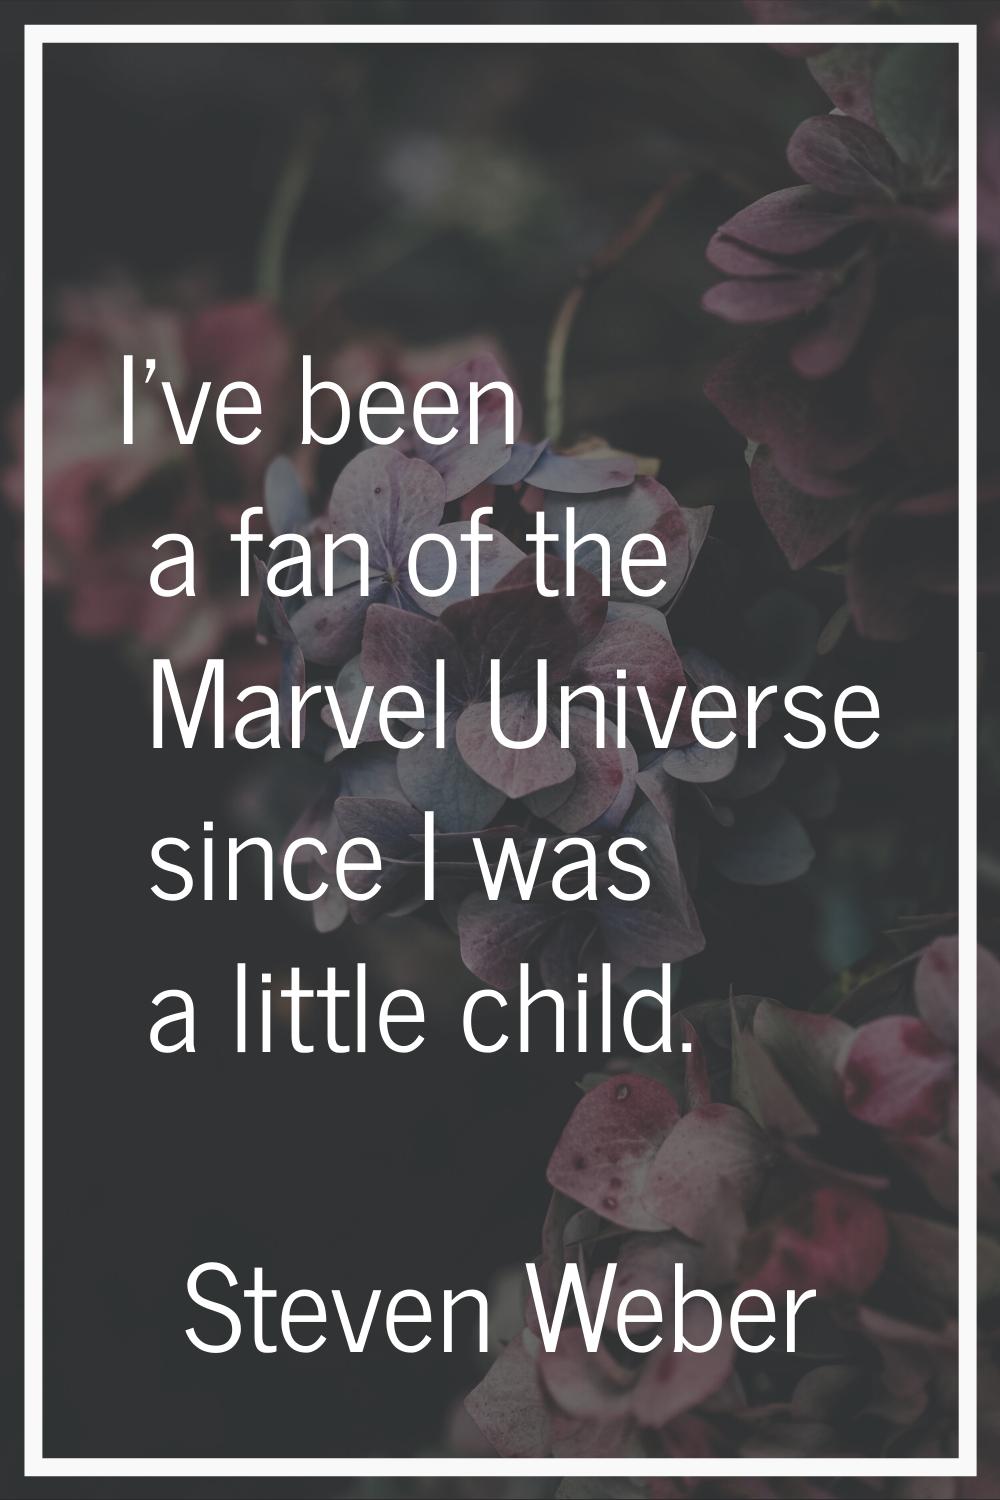 I've been a fan of the Marvel Universe since I was a little child.